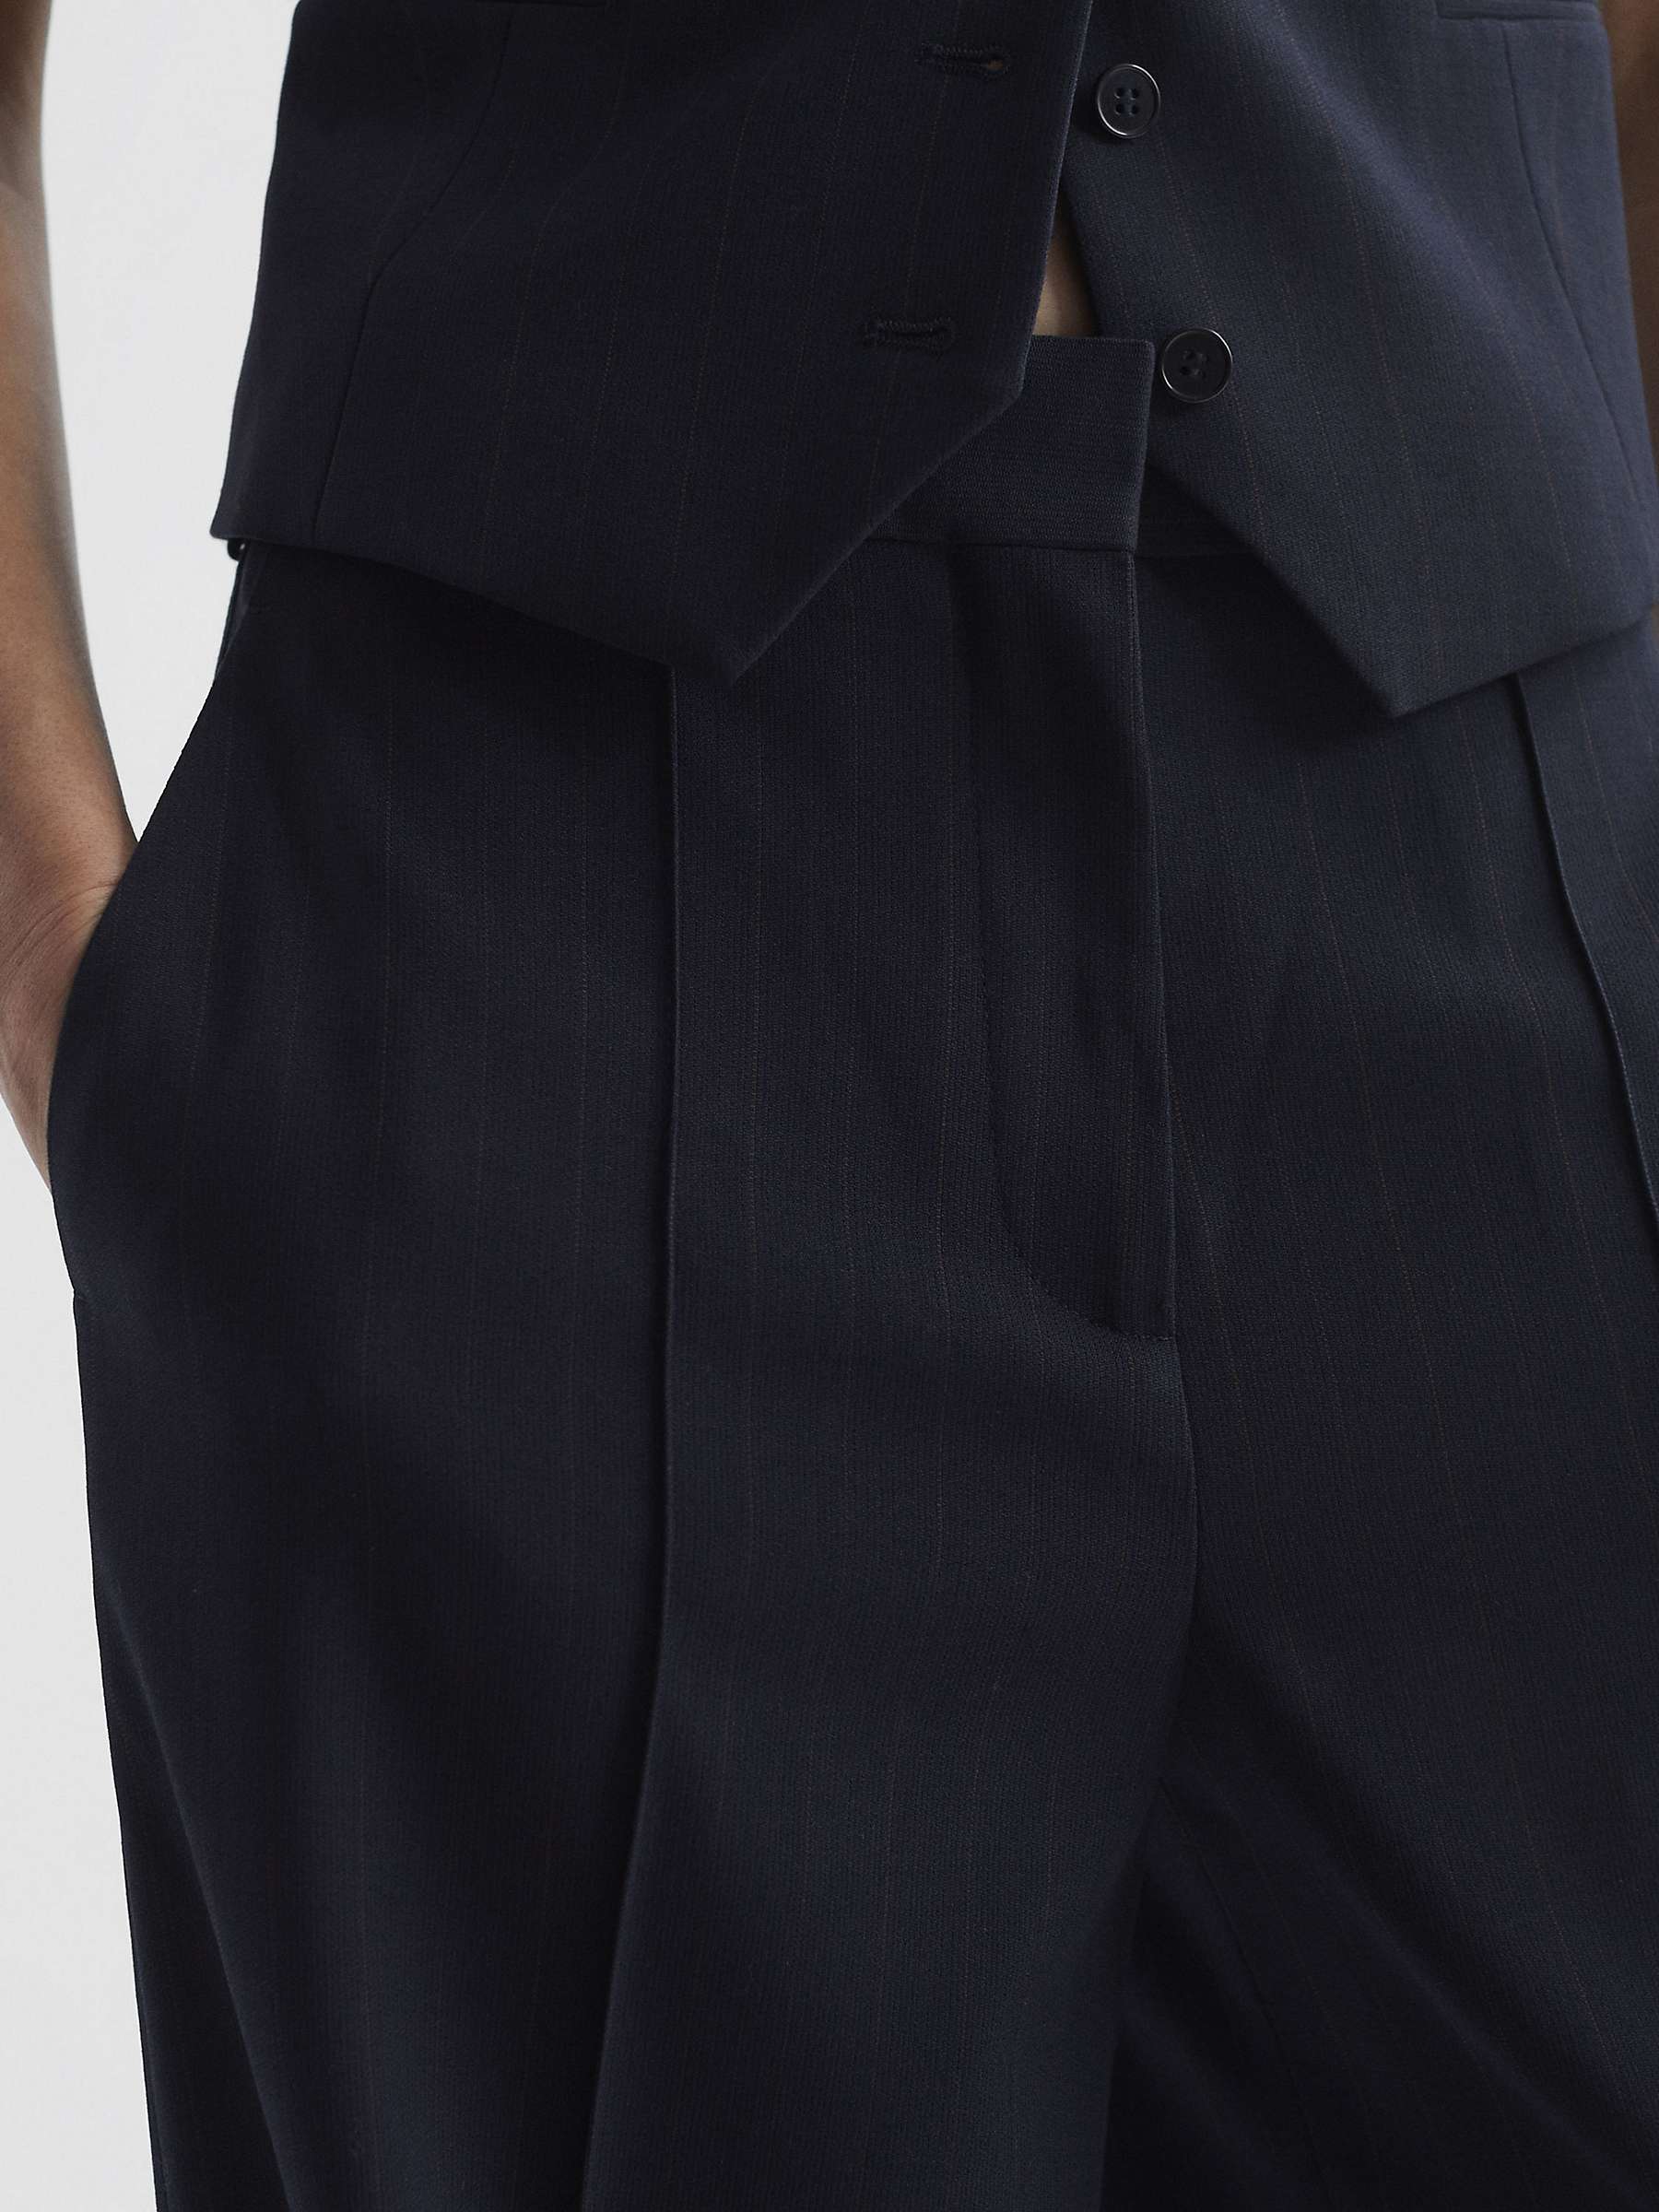 Buy Reiss Willow Pinstripe Wool Blend Tailored Trousers, Navy Online at johnlewis.com